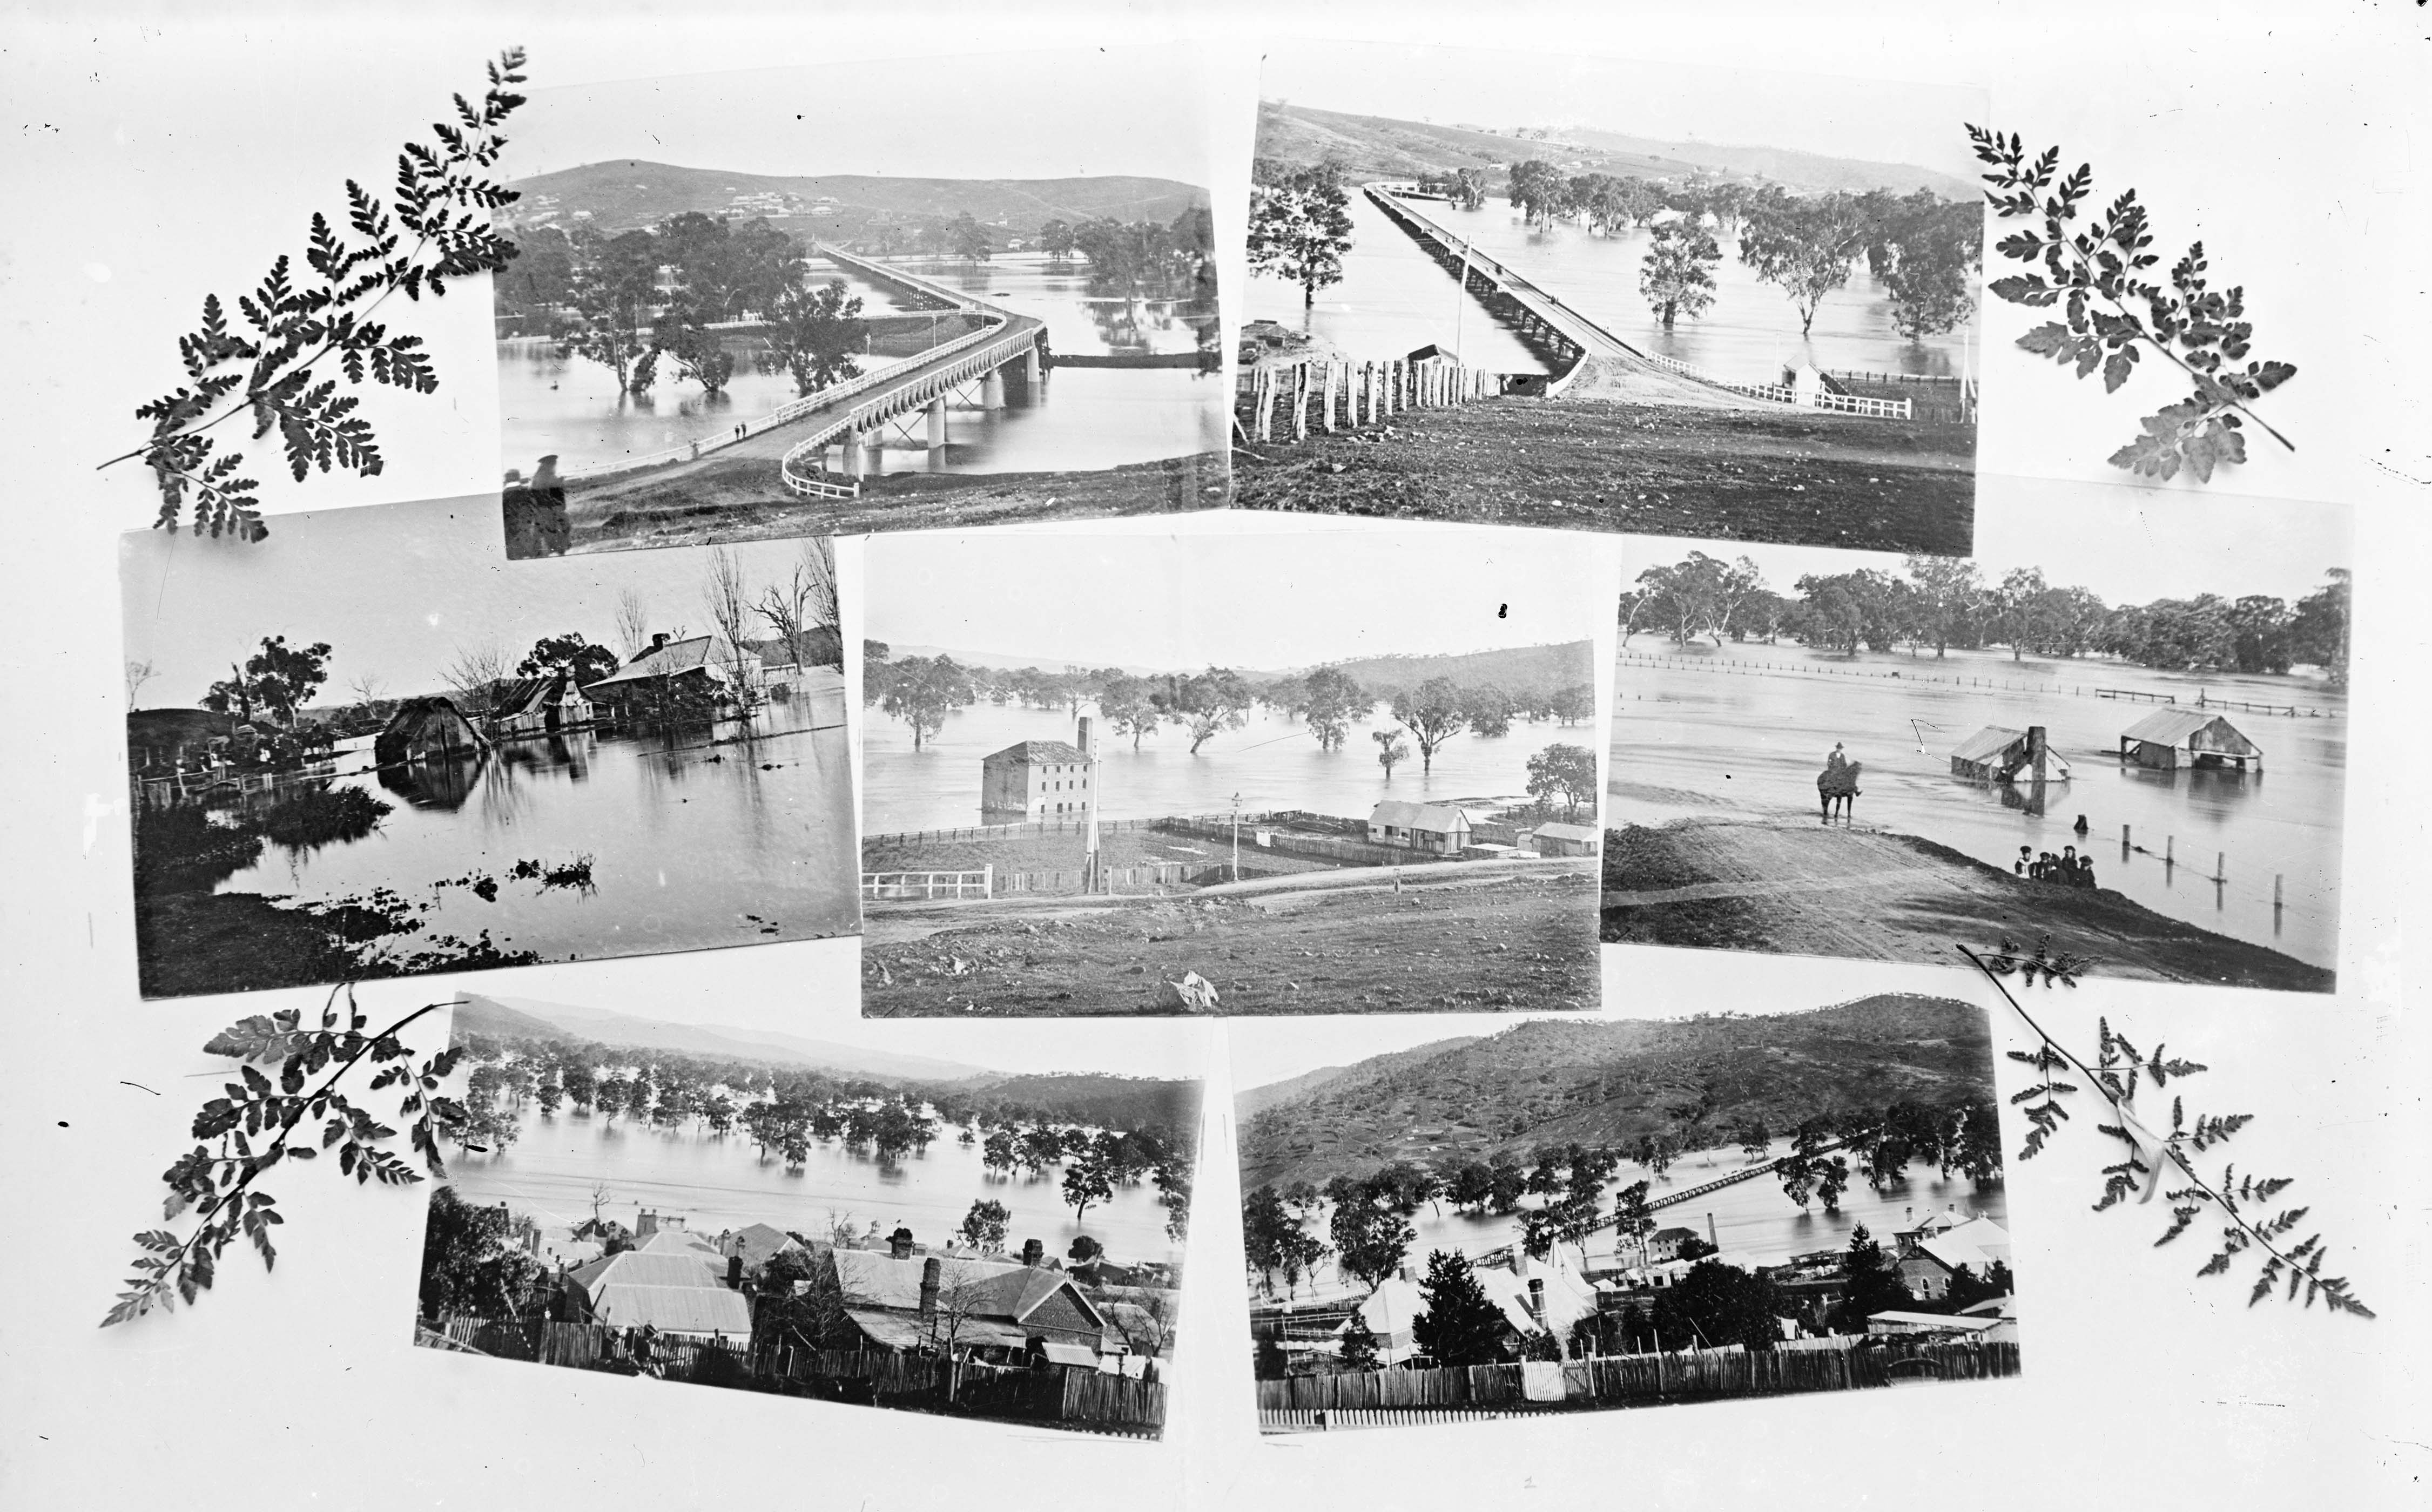 Gundagai photograph collection, photographed by Charles Louis Gabriel.